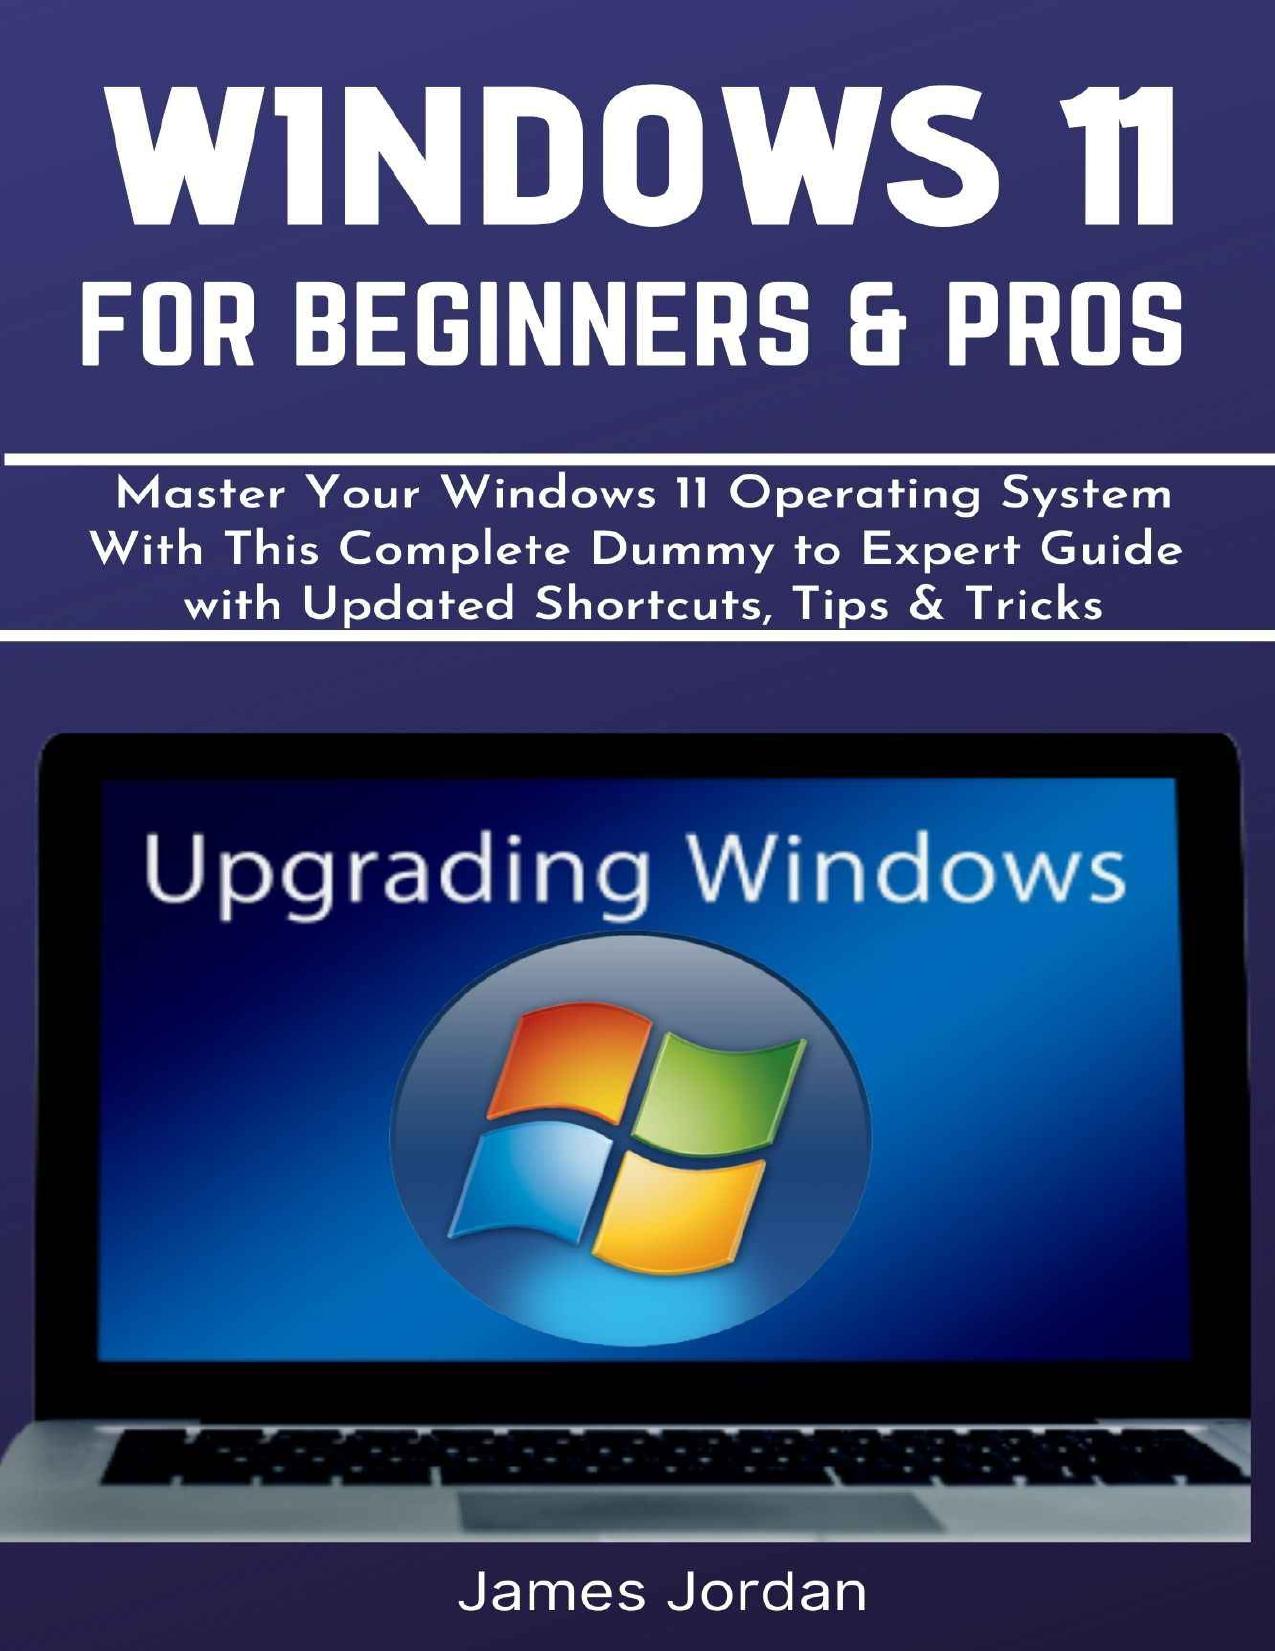 WINDOWS 11 FOR BEGINNERS & PROS: Master Your Windows 11 Operating System With This Complete Dummy to Expert Guide with Updated Shortcuts, Tips & Tricks by JAMES JORDAN